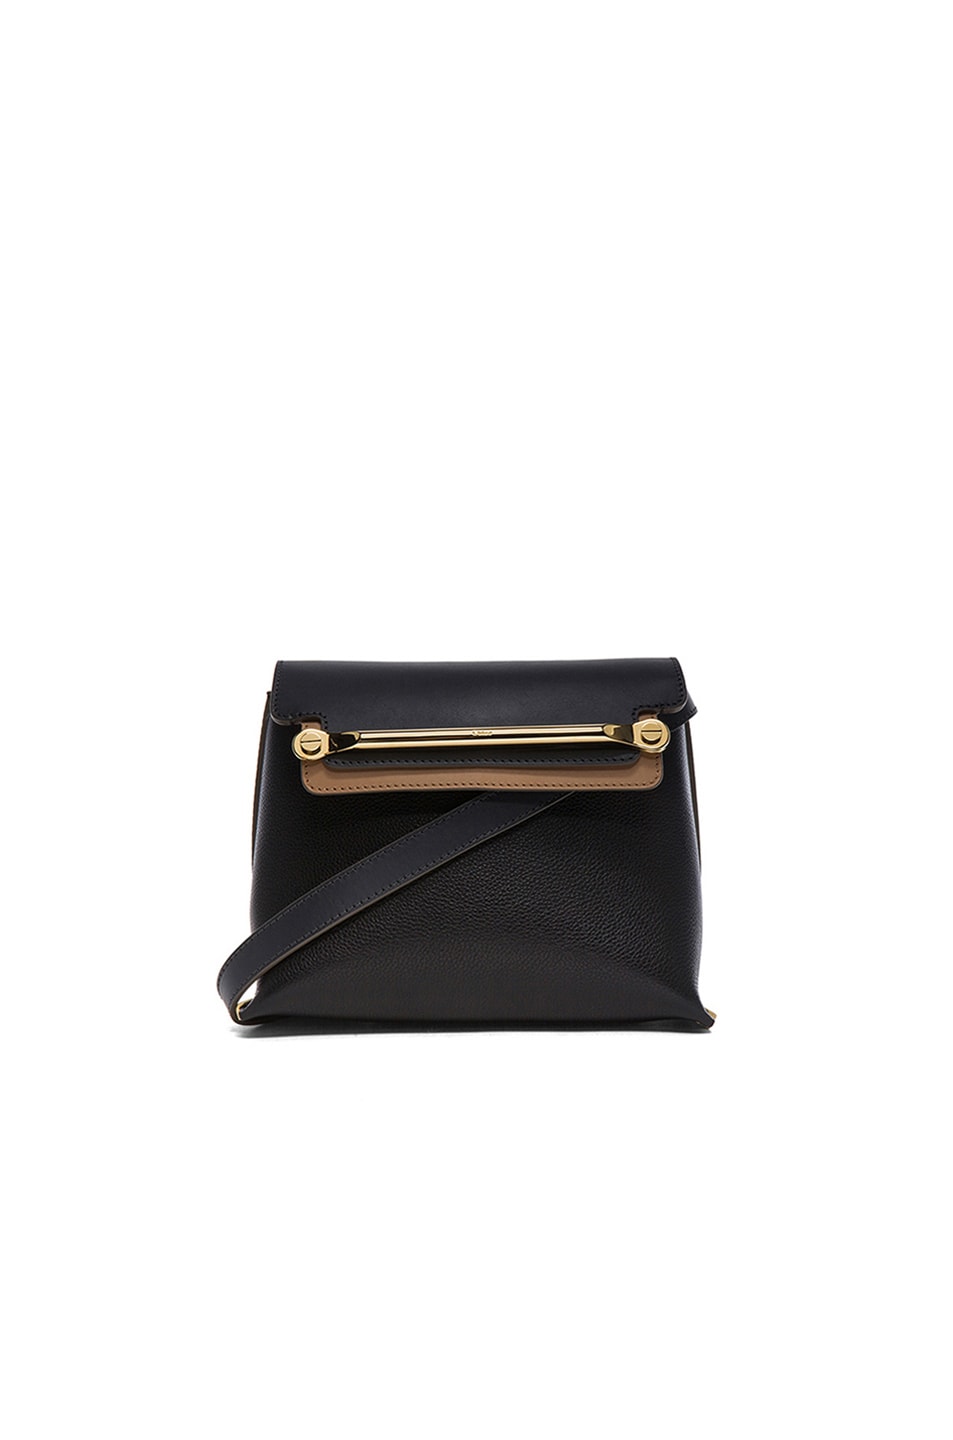 Image 1 of Chloe Small Clare Bag in Black & Sand